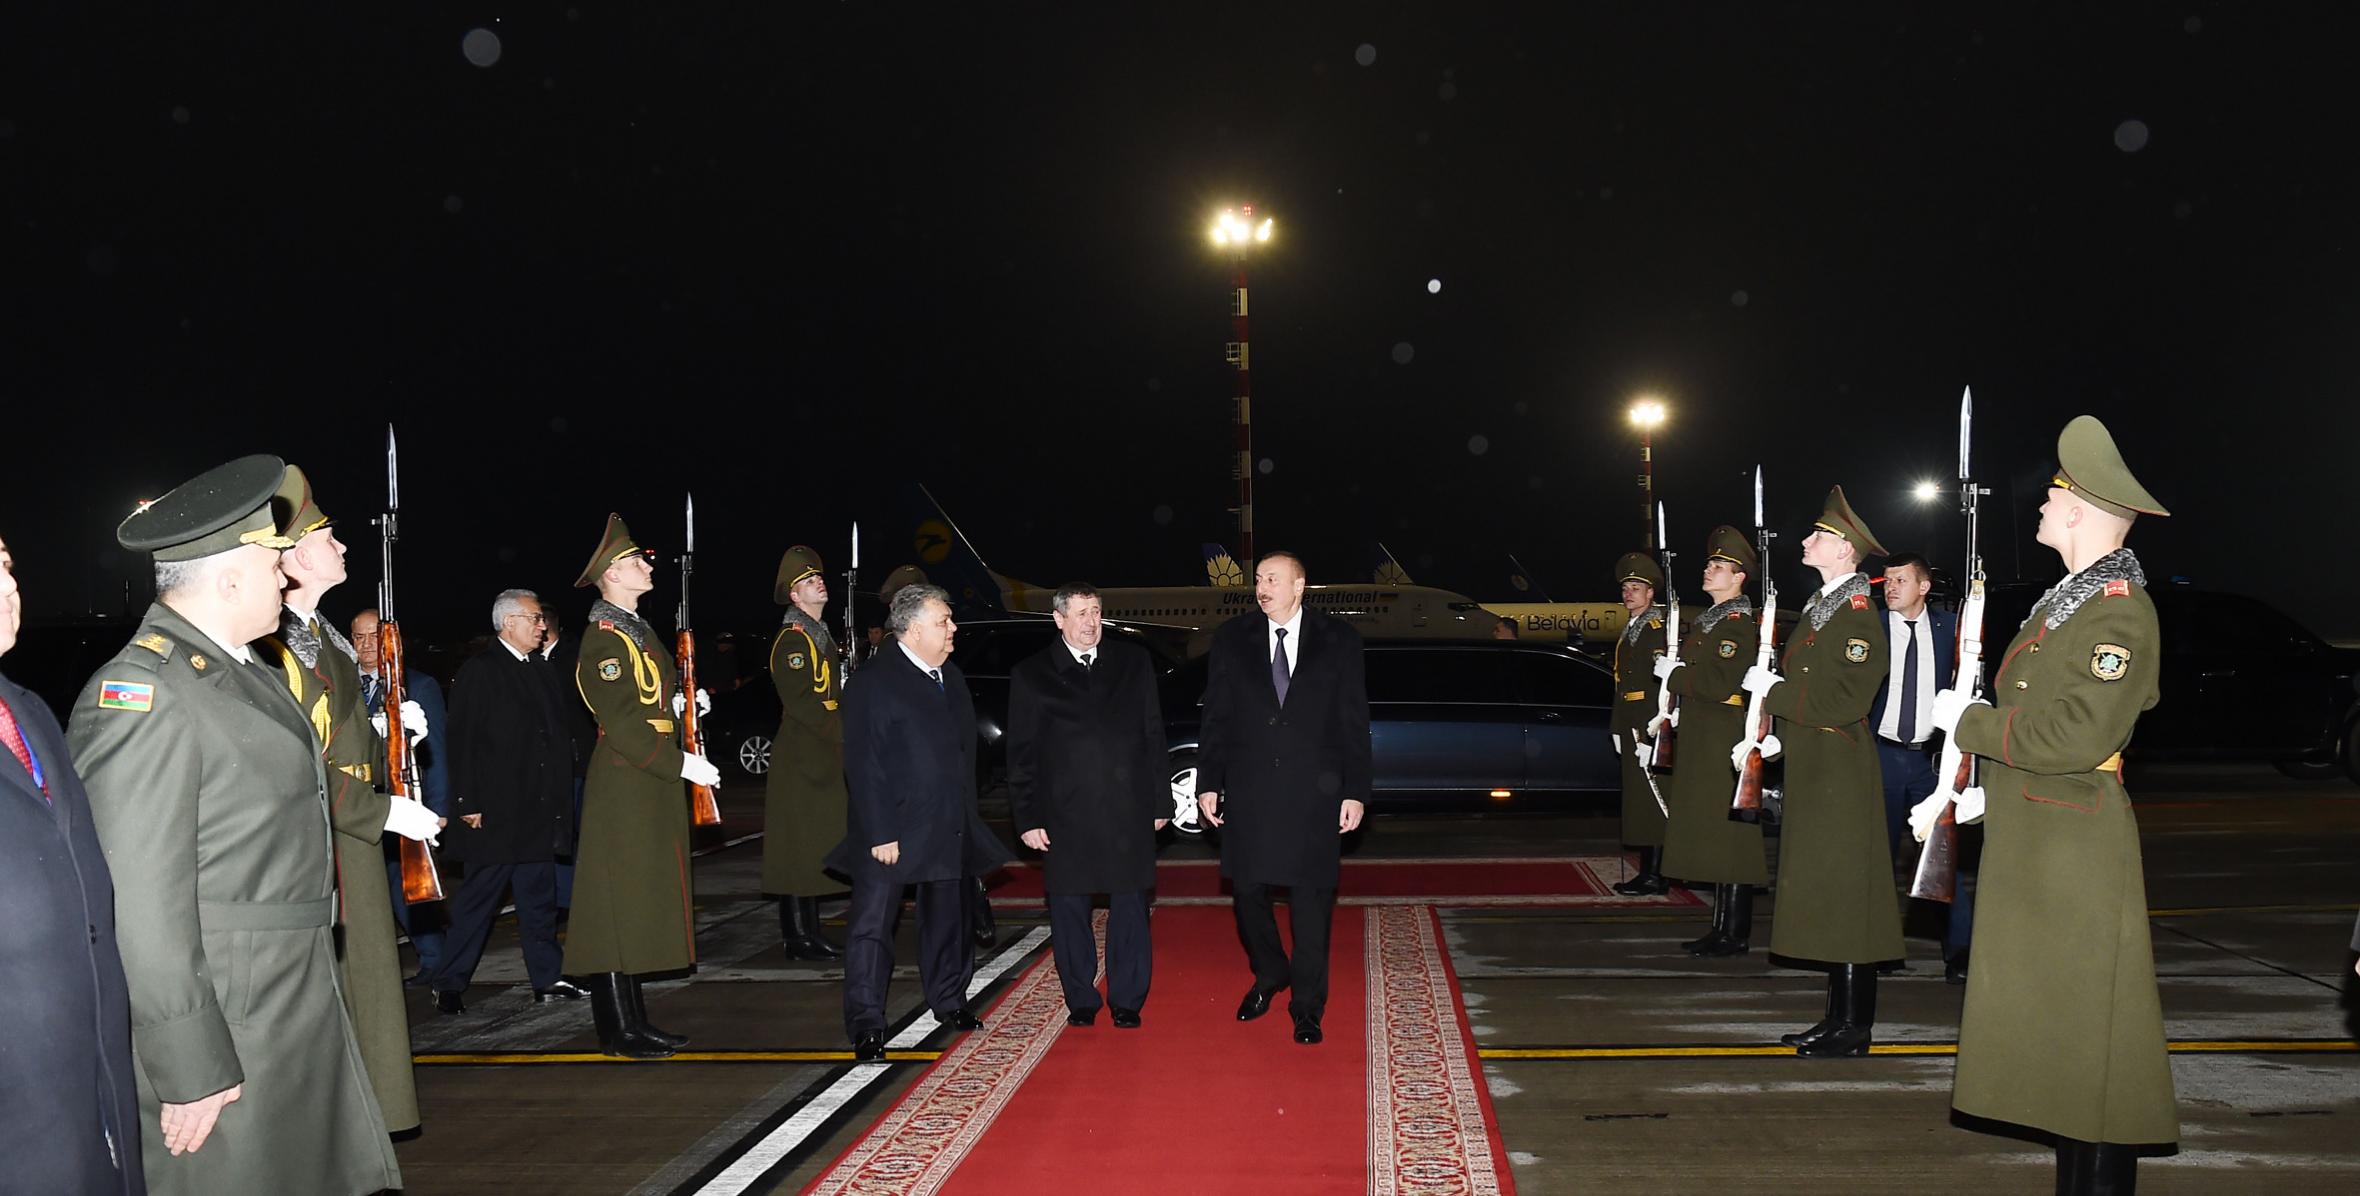 Ilham Aliyev completed official visit to Belarus